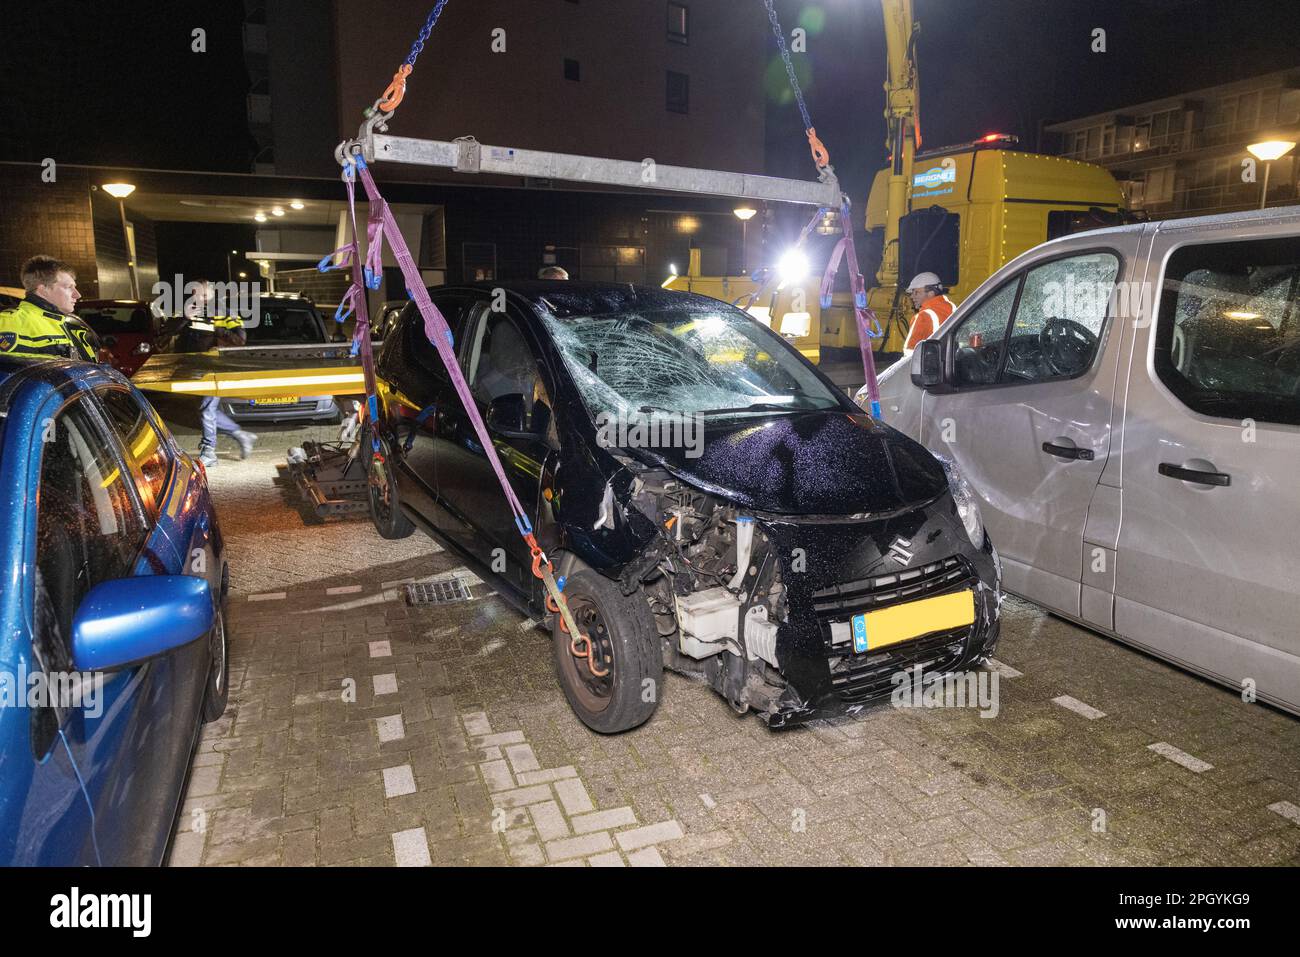 IJMUIDEN - A motorist killed a woman and her dog and then drove on. Later that evening, three people reported to the police station. They have been arrested. Their role in the traffic accident is being investigated. The car involved in the accident was found on Schiplaan and seized for investigation. ANP MICHEL VAN BERGEN netherlands out - belgium out Stock Photo